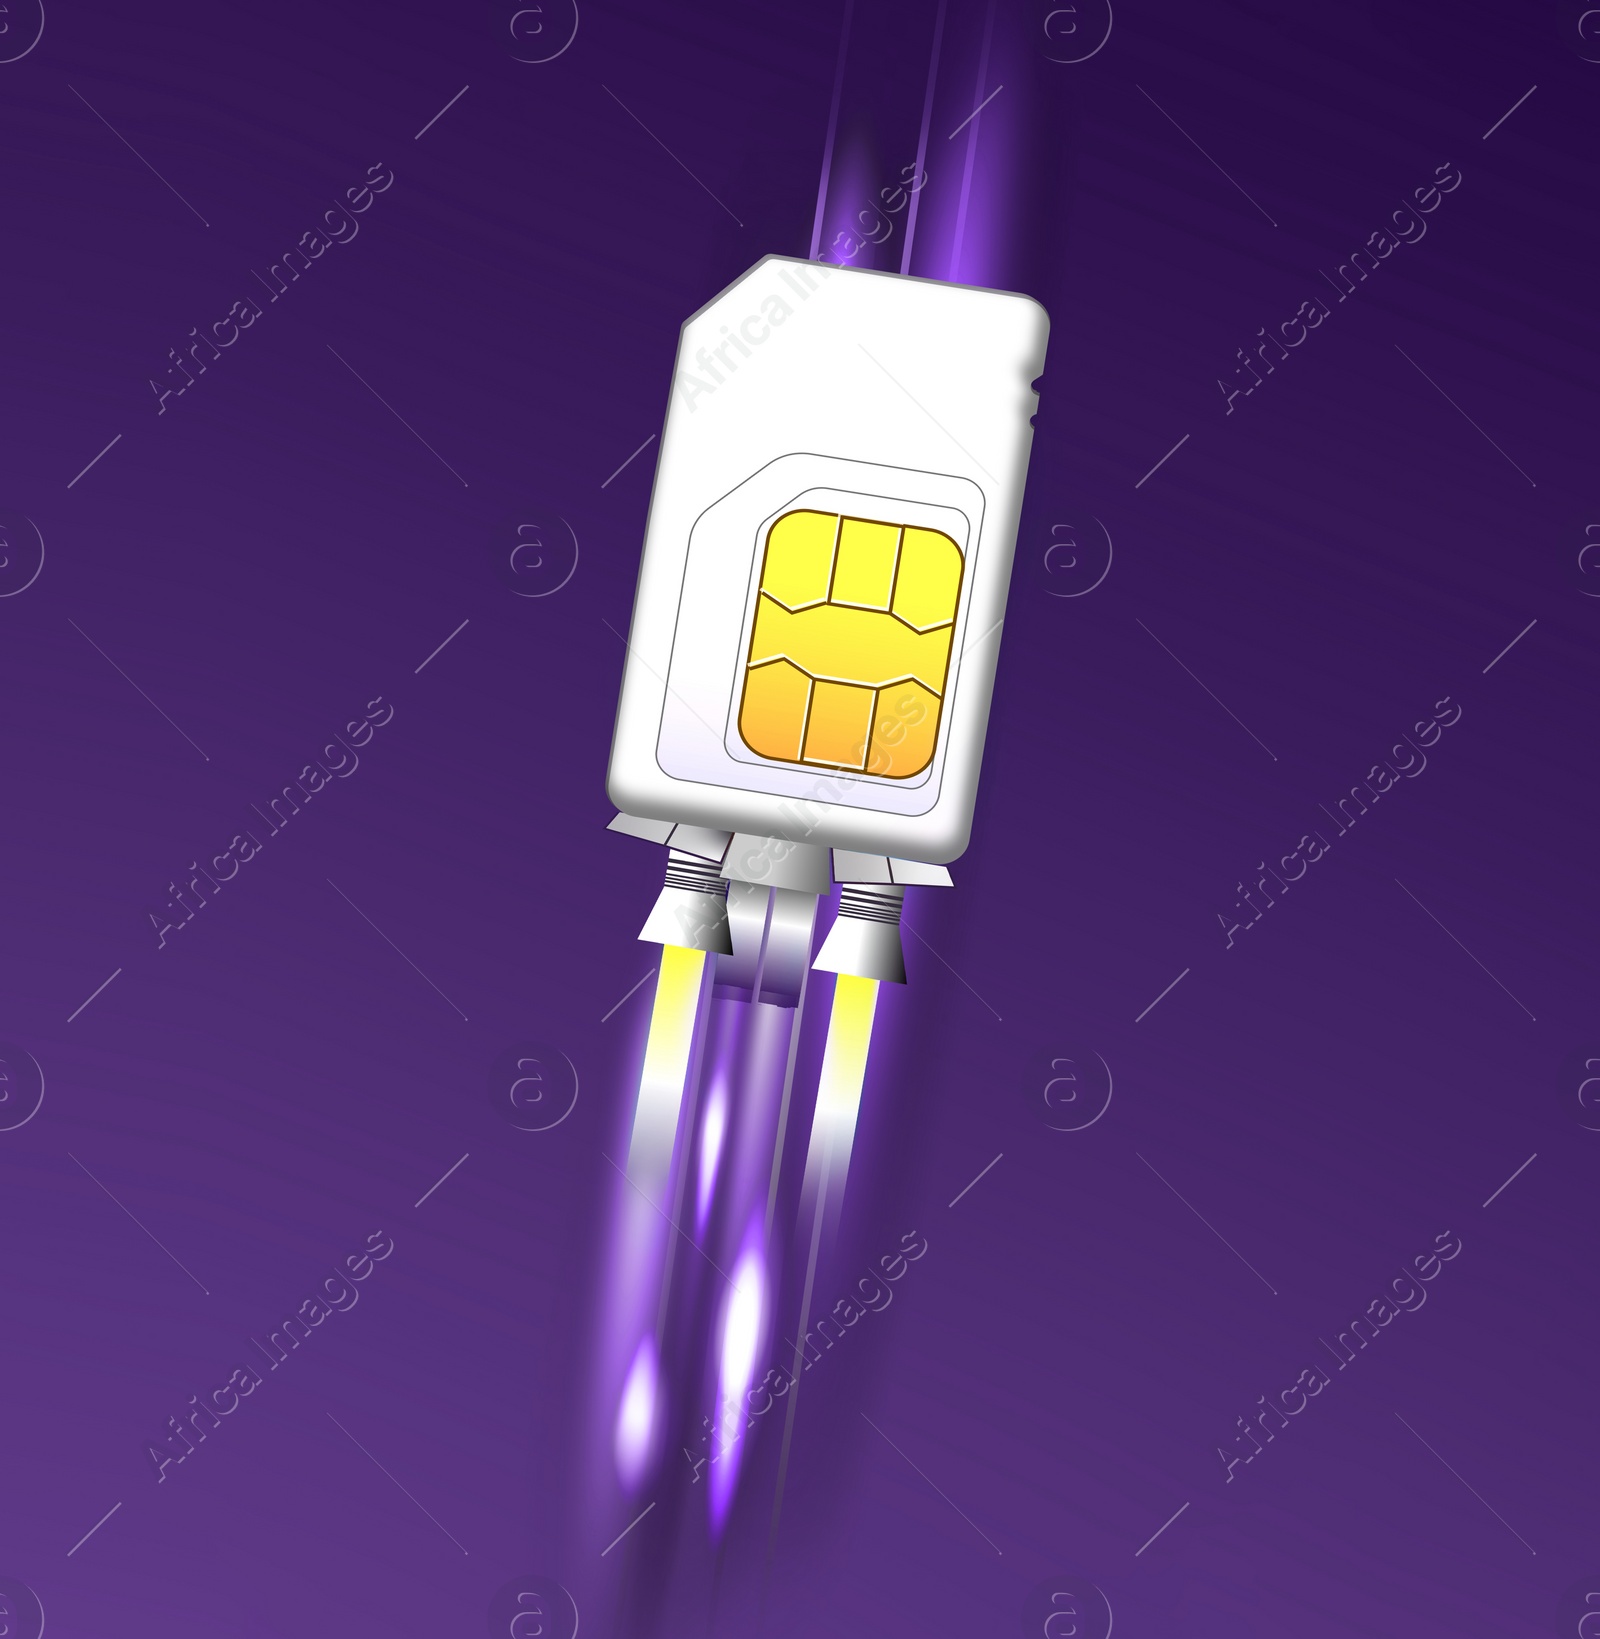 Image of Fast internet connection. SIM card rocket flying on purple background